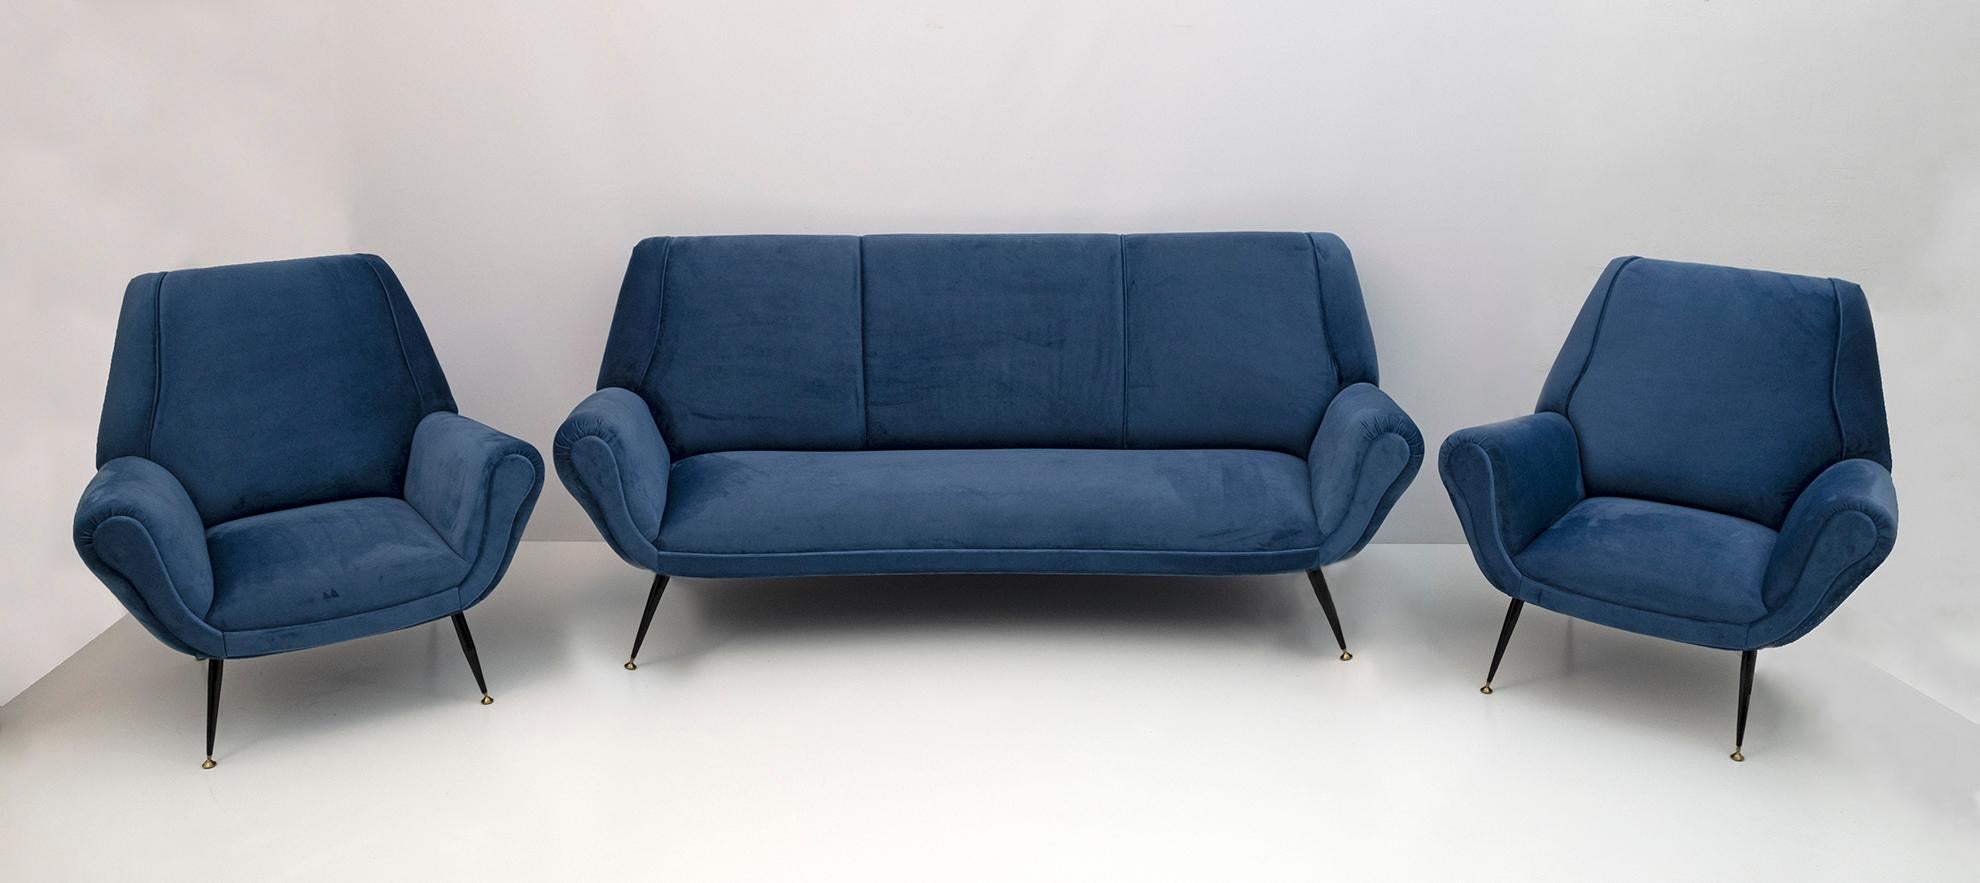 Pair of armchairs and curved sofa designed by Gigi Radice for Minotti. They are made with solid wood structure and blue velvet upholstery with metal and brass legs. The structures are authentic, only the upholstery and padding have been